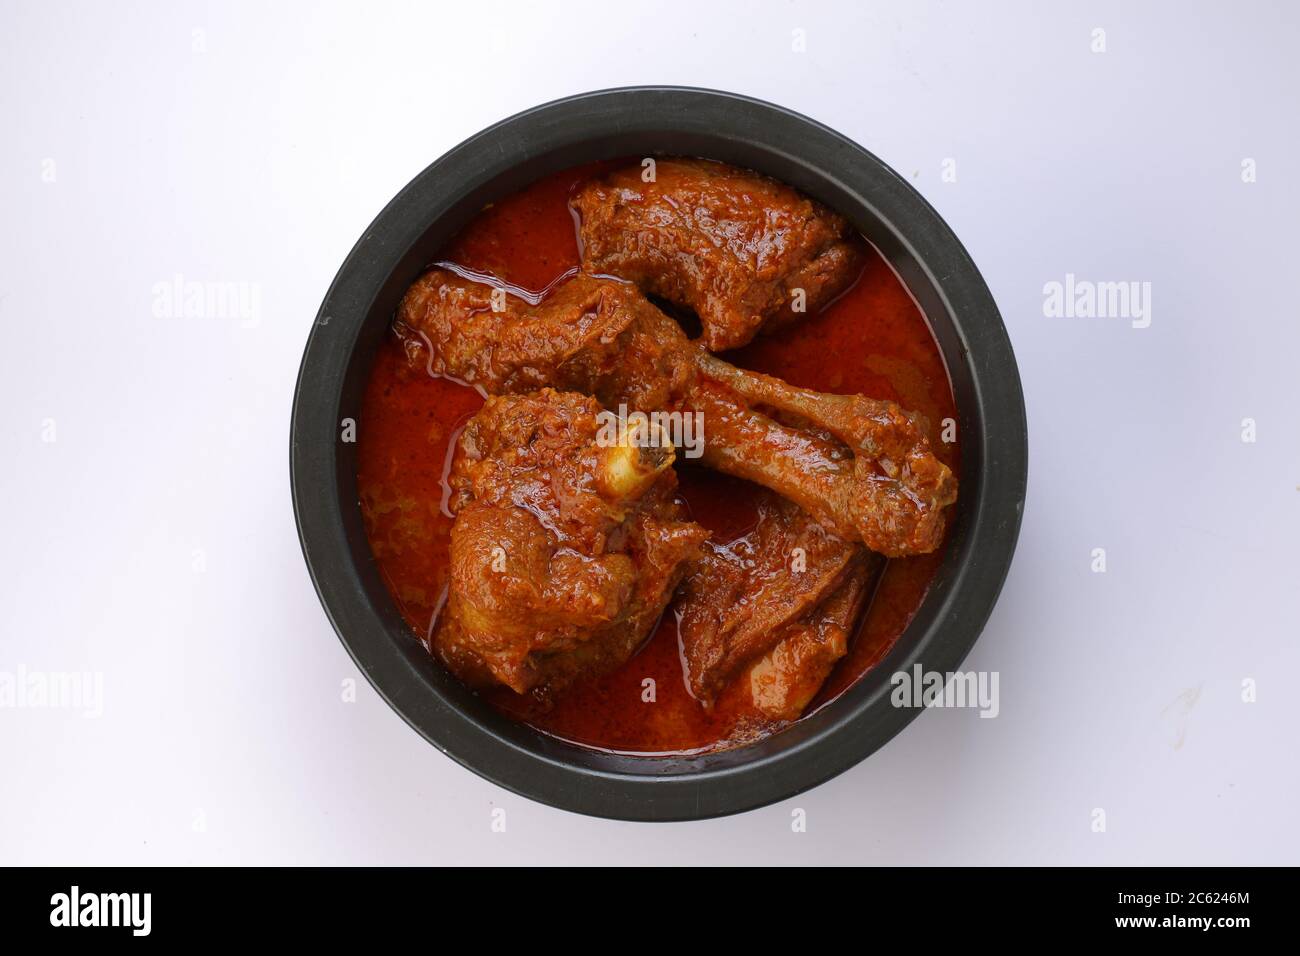 Topview of Mutton curry or Lamb curry,spicy and delicious dish arranged in a black vessel with white texture or background,an ideal combination for ap Stock Photo